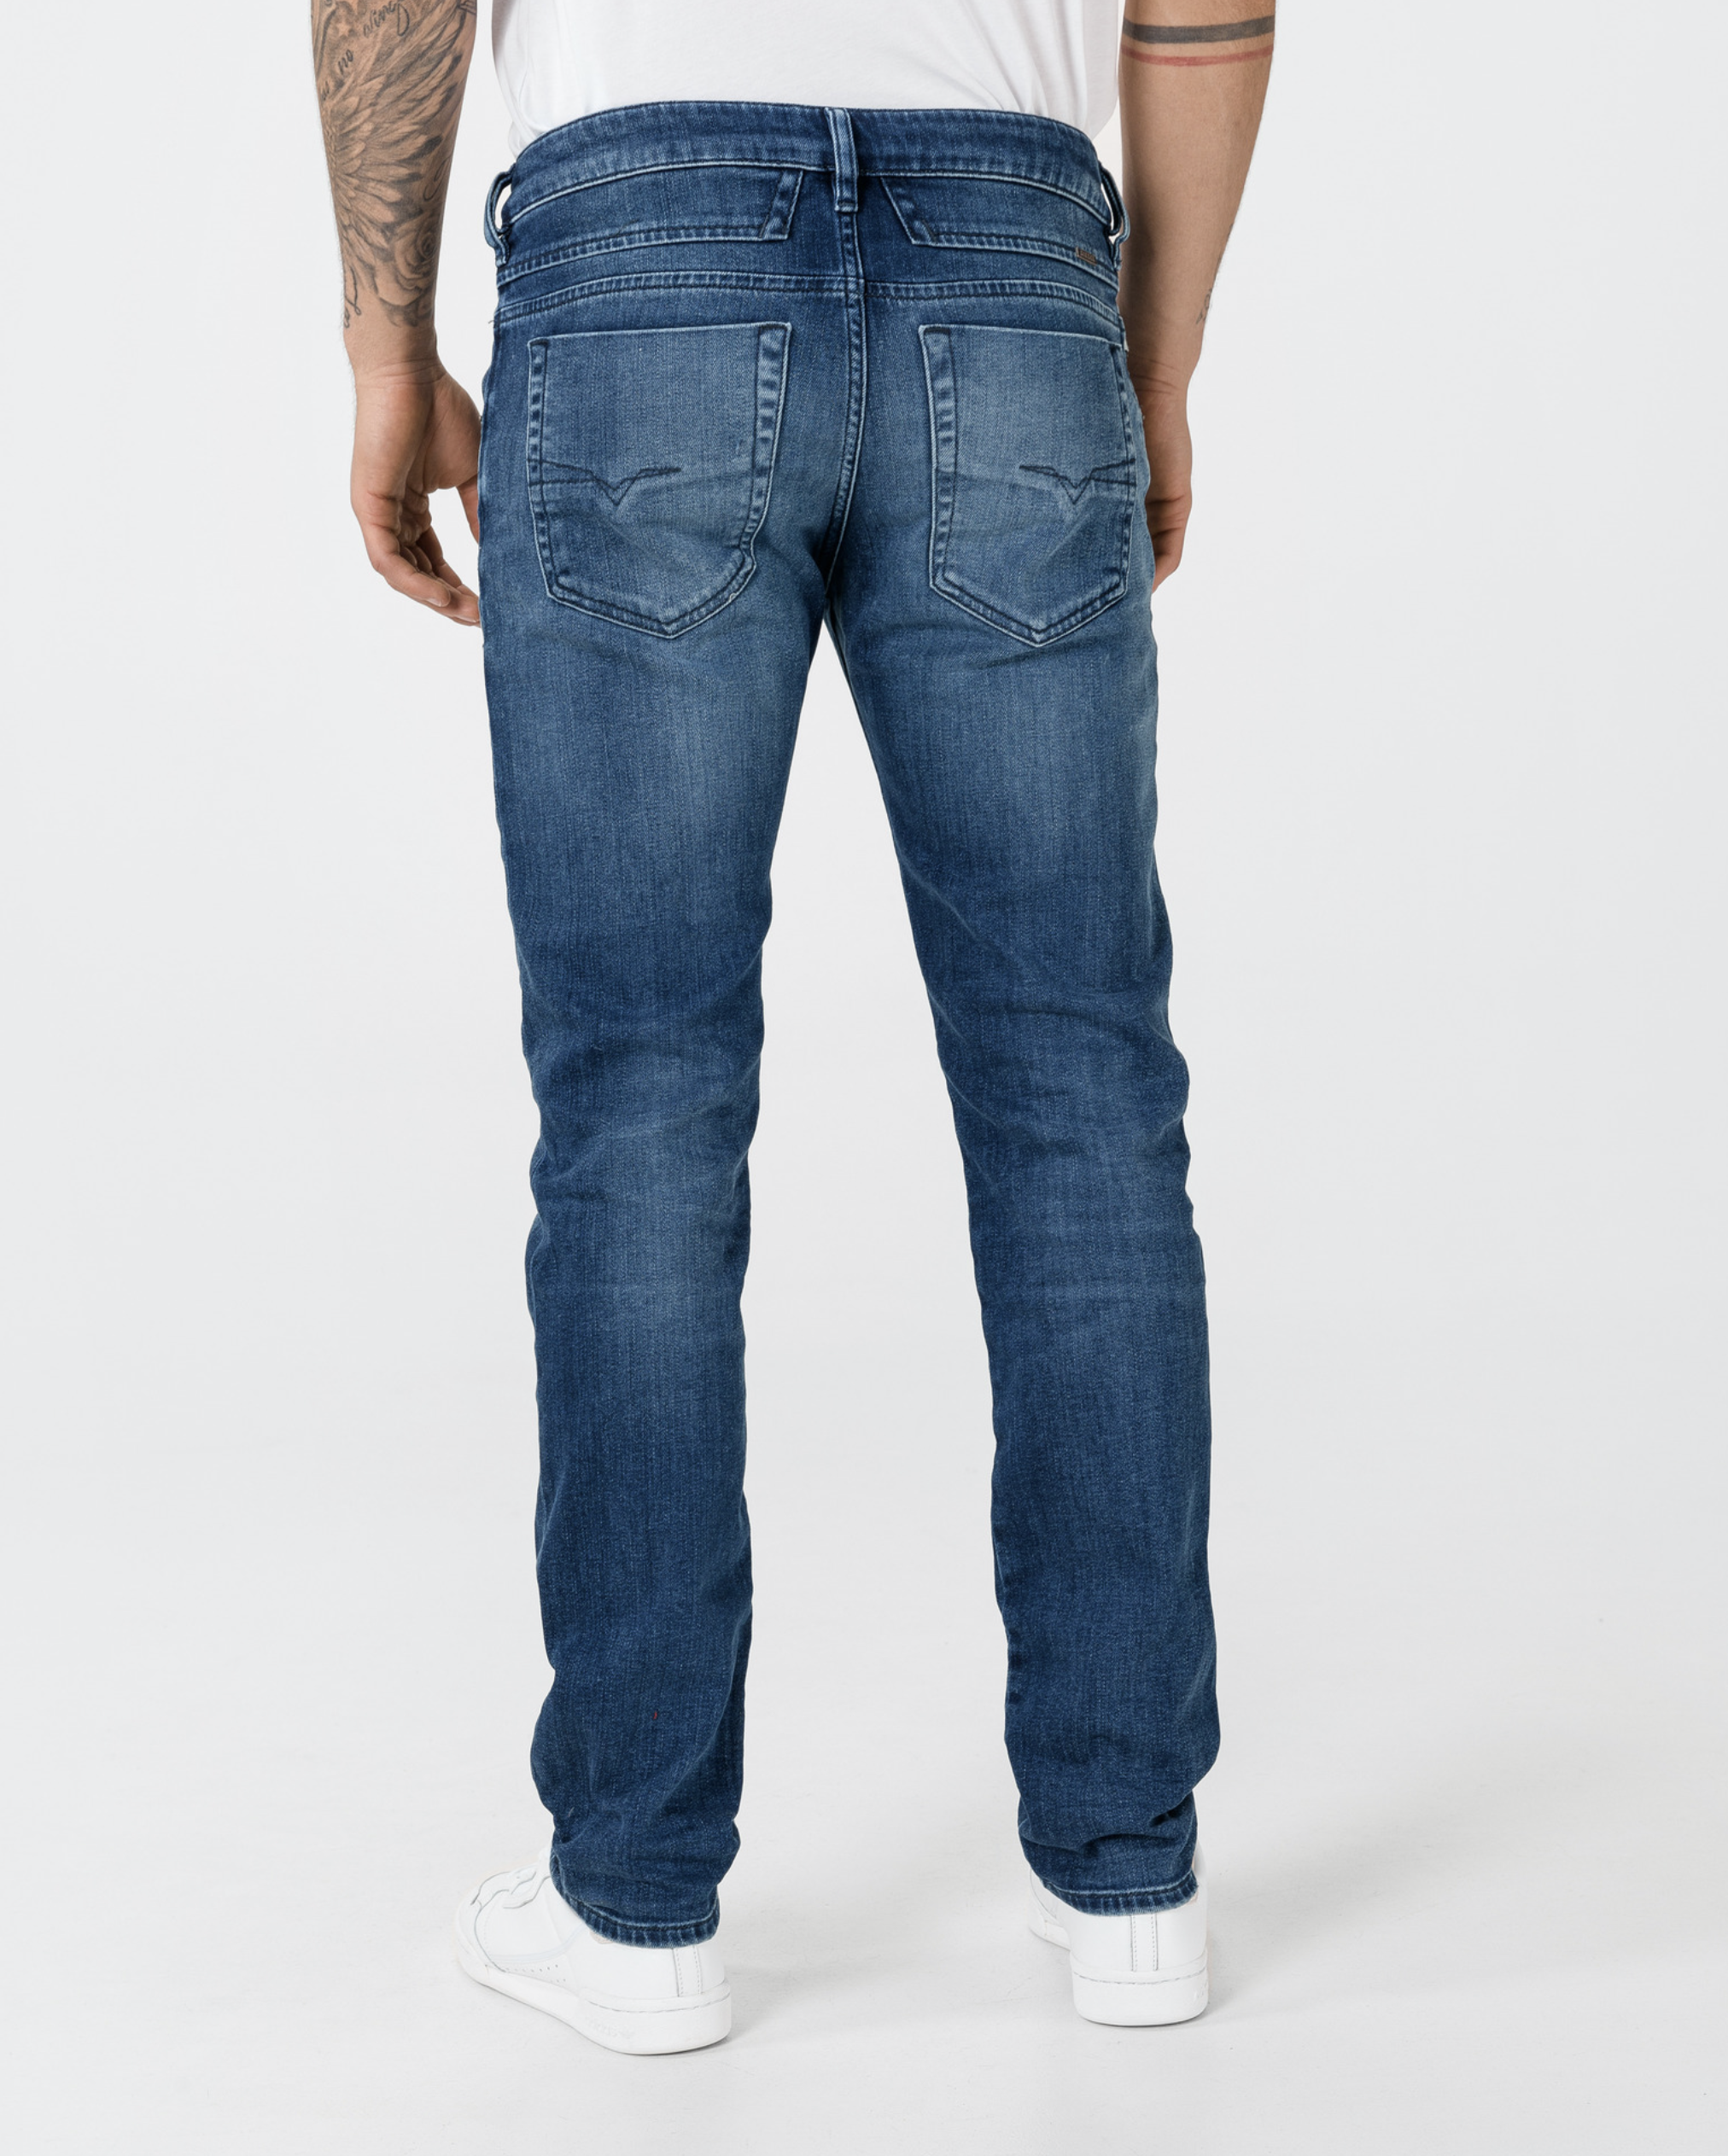 We are Jeans® | Top Jeans Online Stores Finder no.1